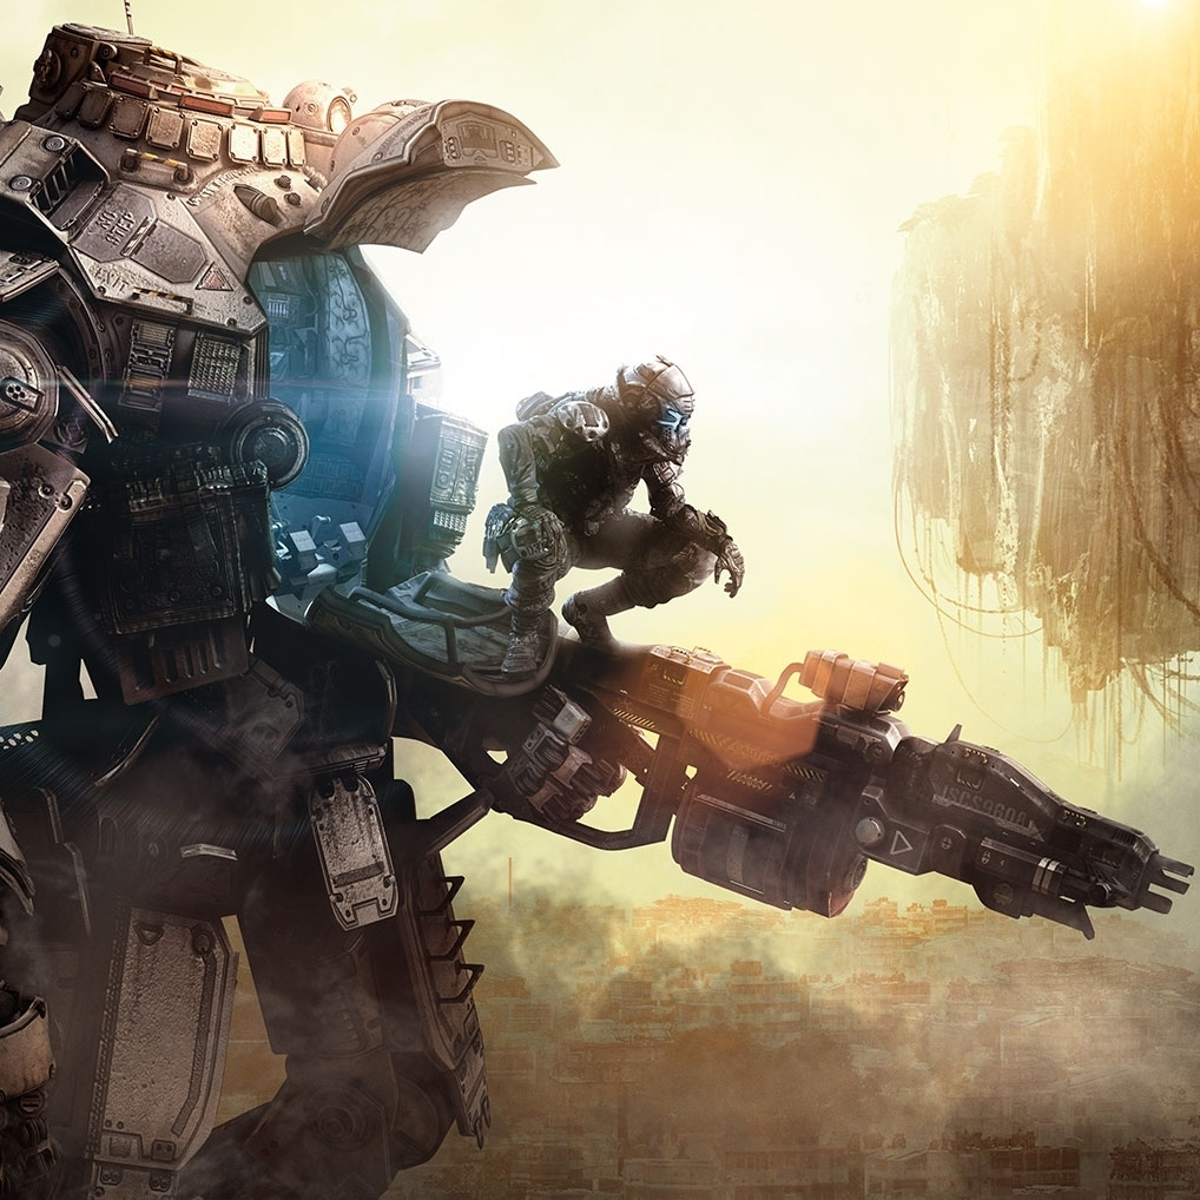 Call of Duty has become review-proof, analyst suggests, but Titanfall &  Destiny will pose real challenge in 2014